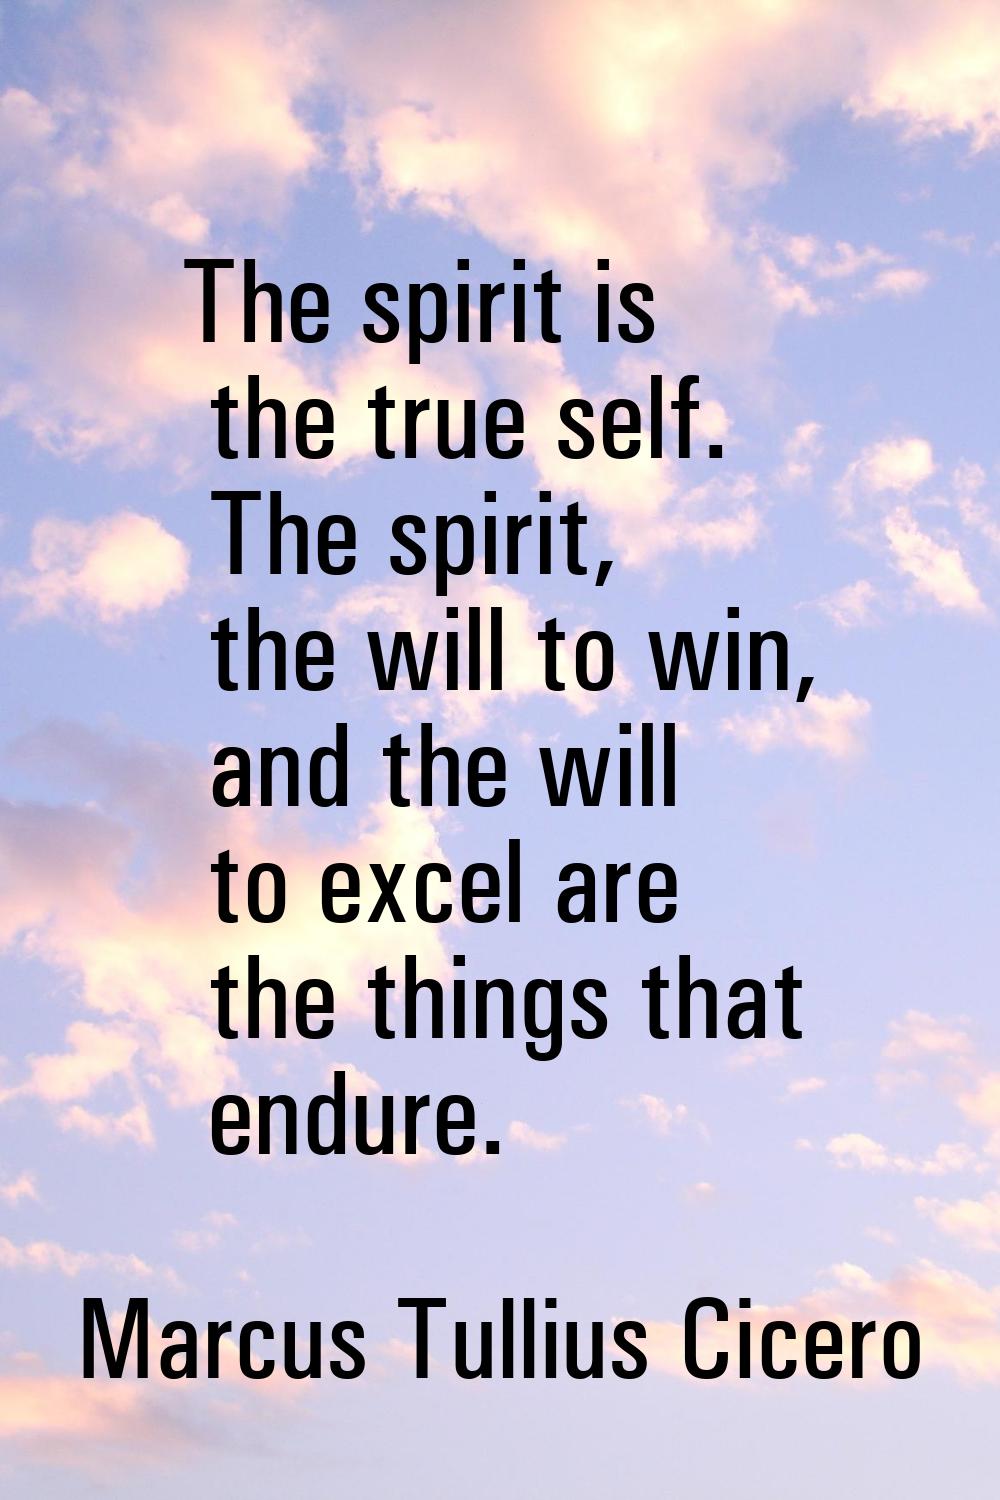 The spirit is the true self. The spirit, the will to win, and the will to excel are the things that